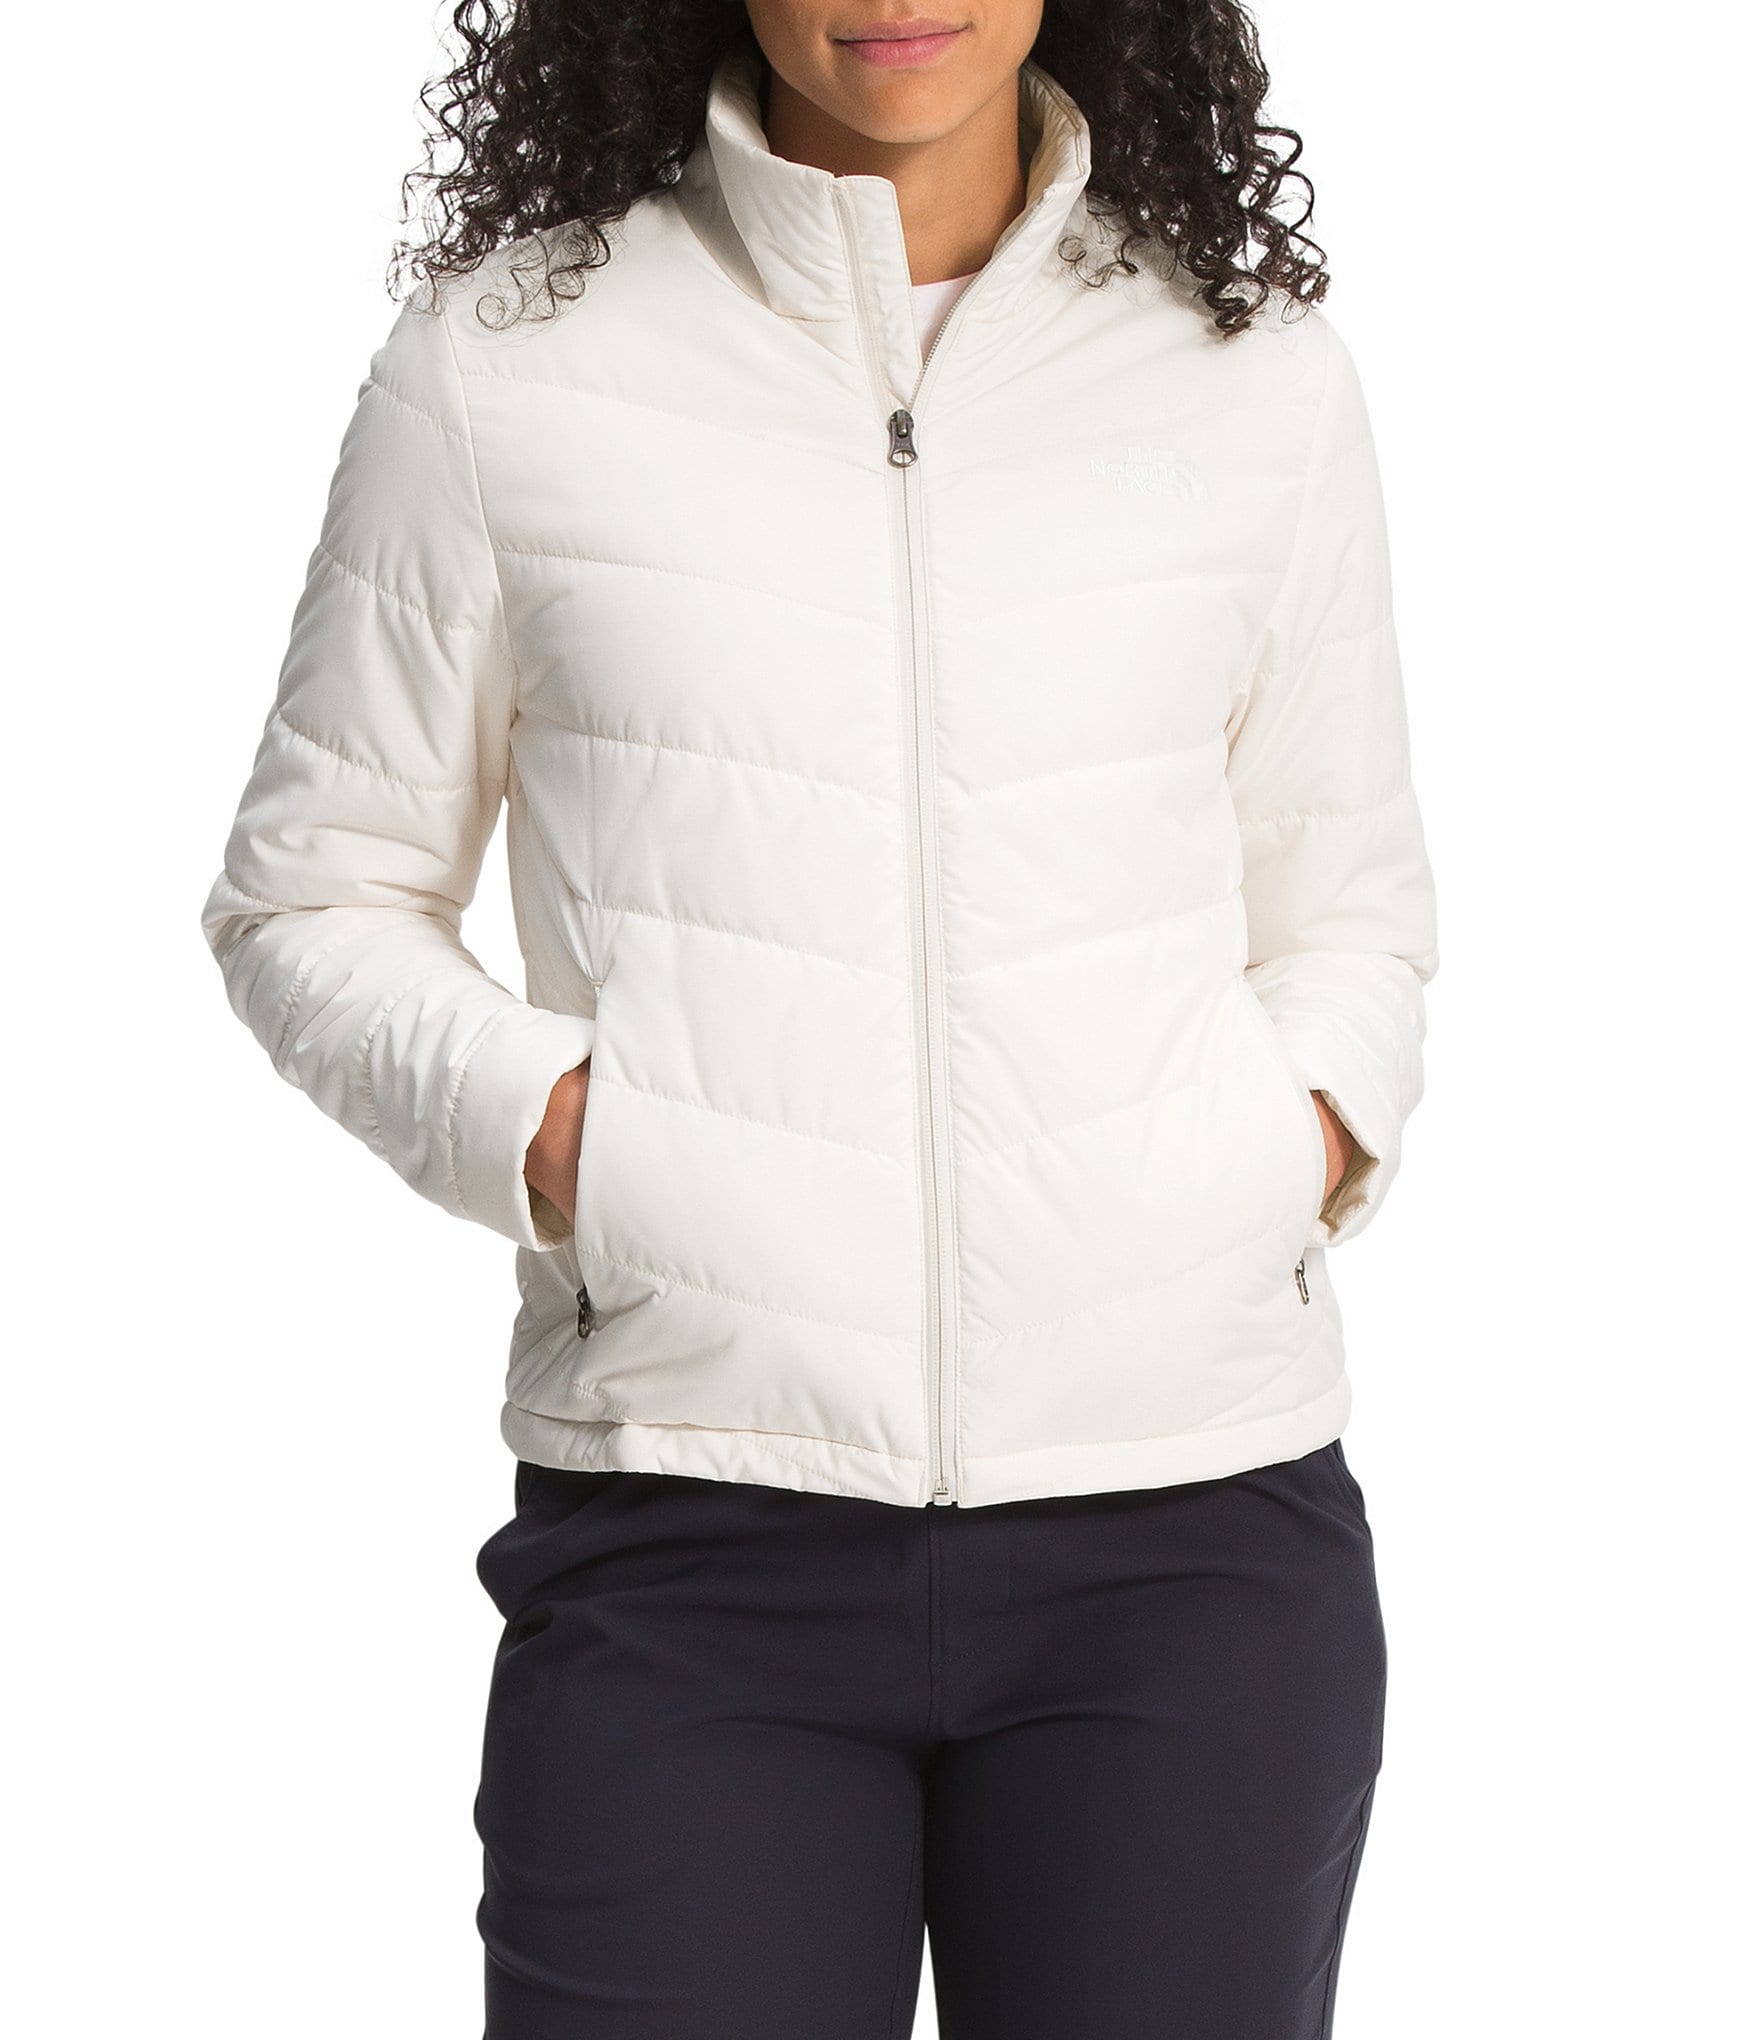 White Women\'s Outdoor and Performance Jackets & Hoodies| Dillard\'s